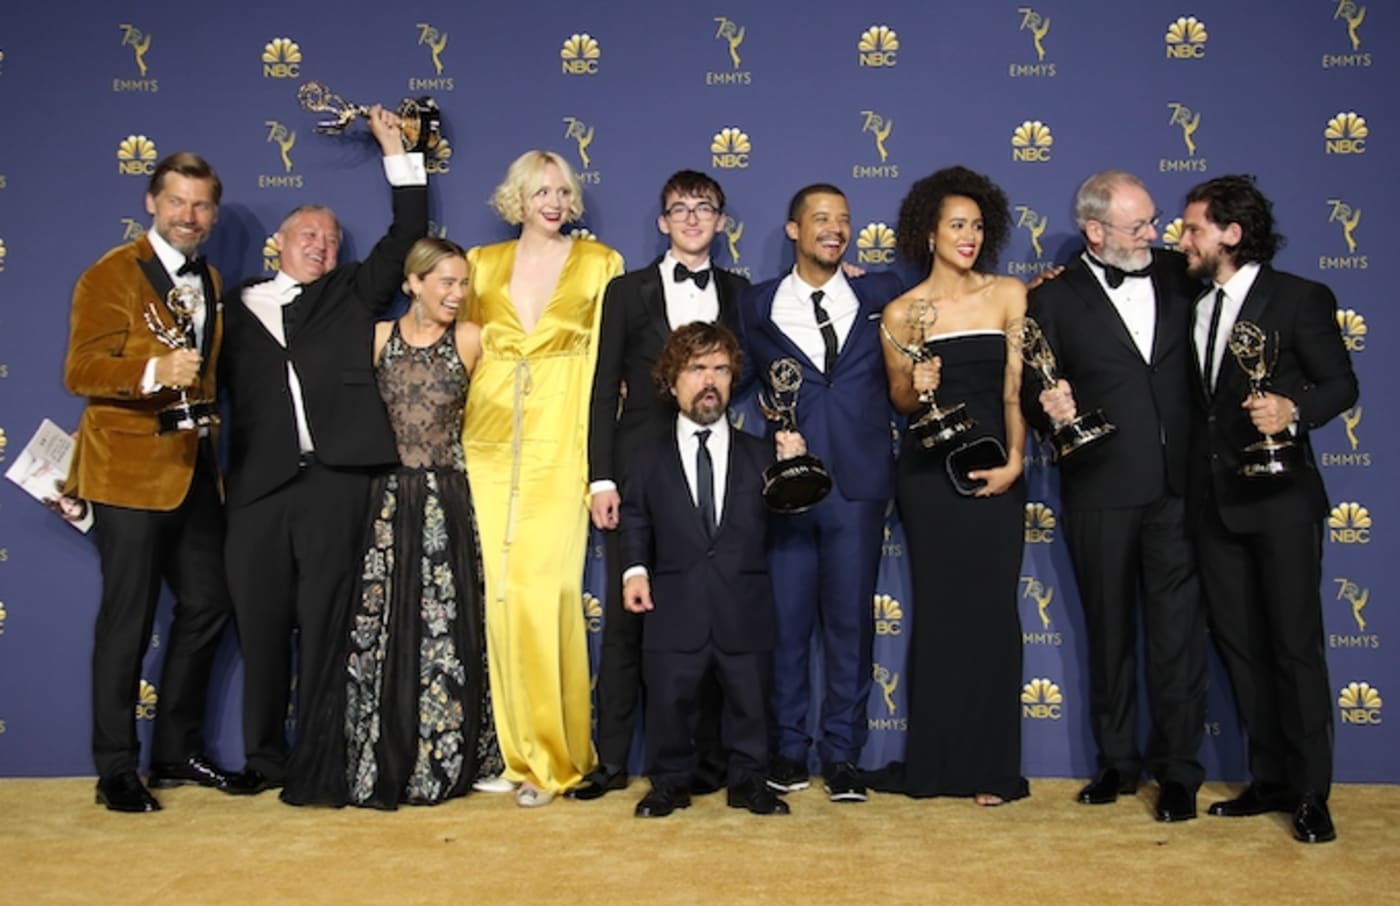 Cast and crew of Game of Thrones.